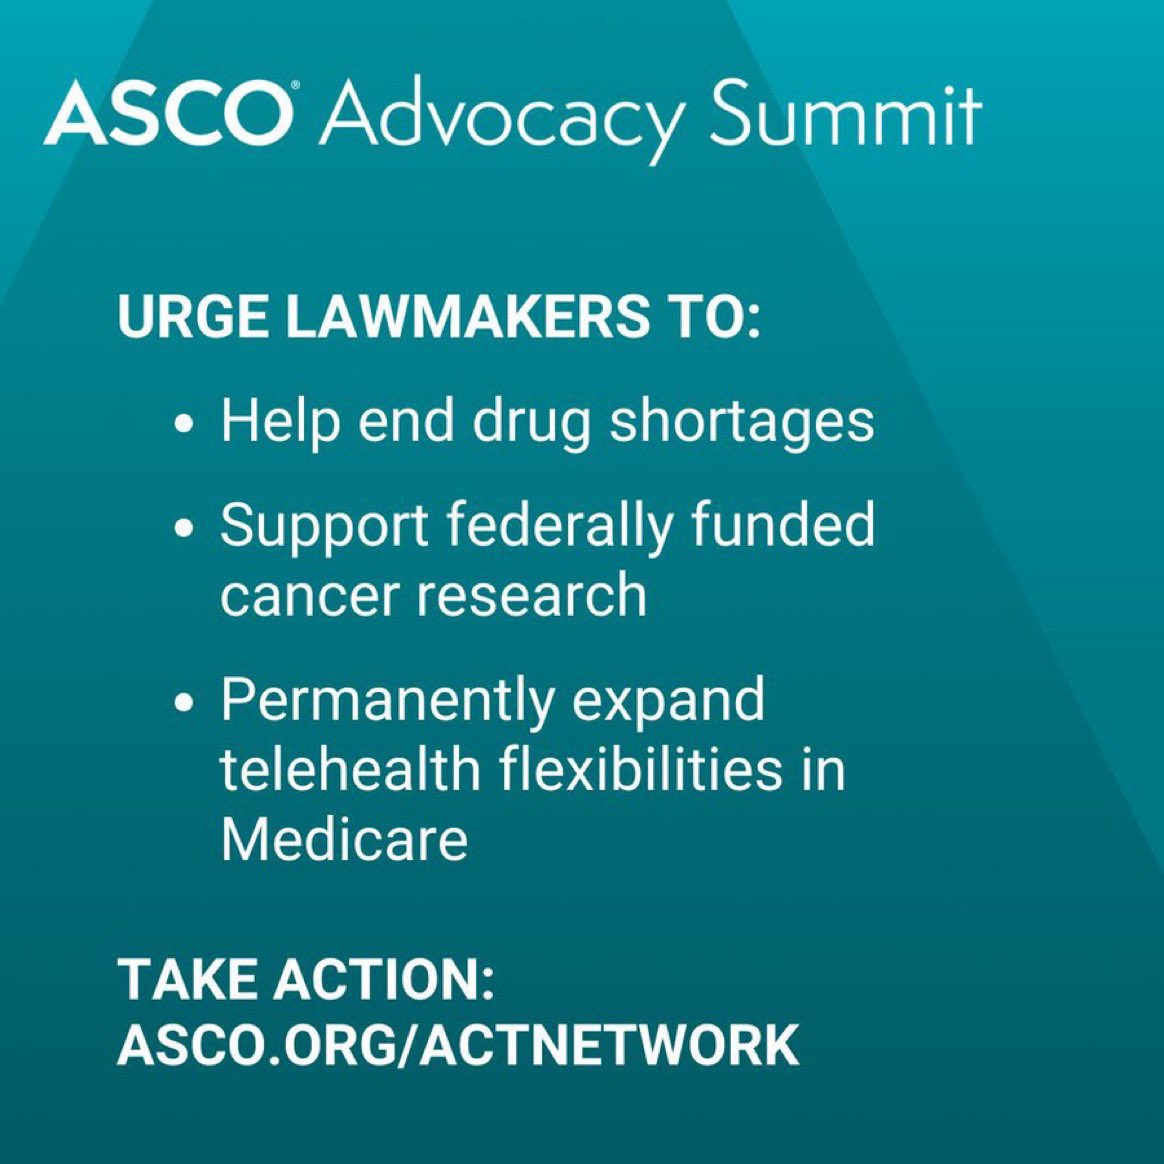 Proud to be named an Advocacy Champion at the #ASCOAdvocacySummit! This past year I engaged with my local representatives to improve care for patients w #cancer. #ASCOAdvocacy  At the 2024 #ASCOAdvocacySummit, through our great society @ASCO, we are urging #Congress to: 👉Help